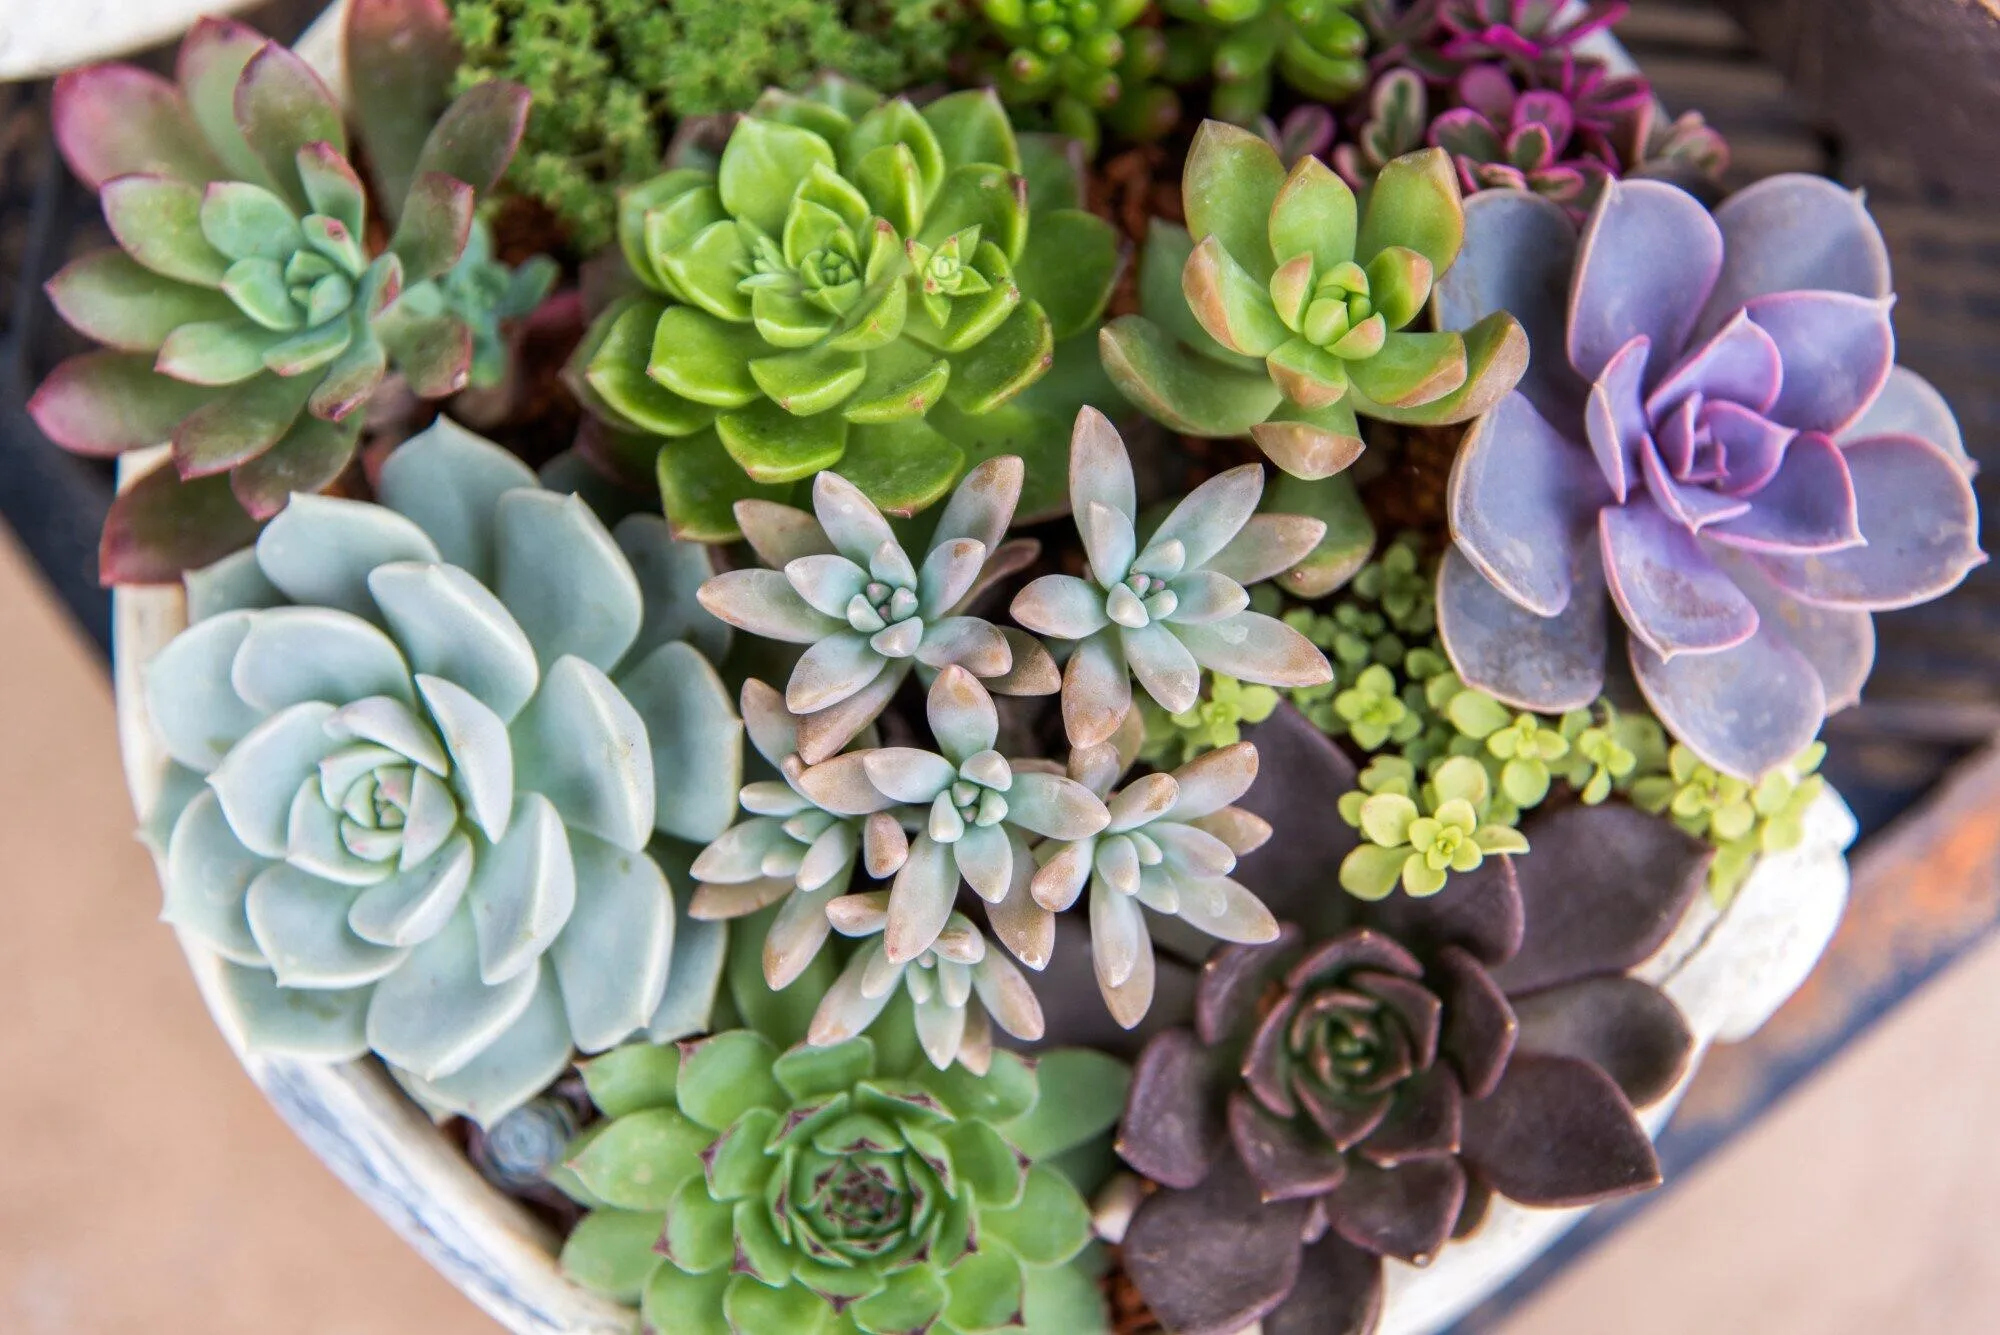 Top Flowering Succulent Plants That Make the Perfect Holiday Gift